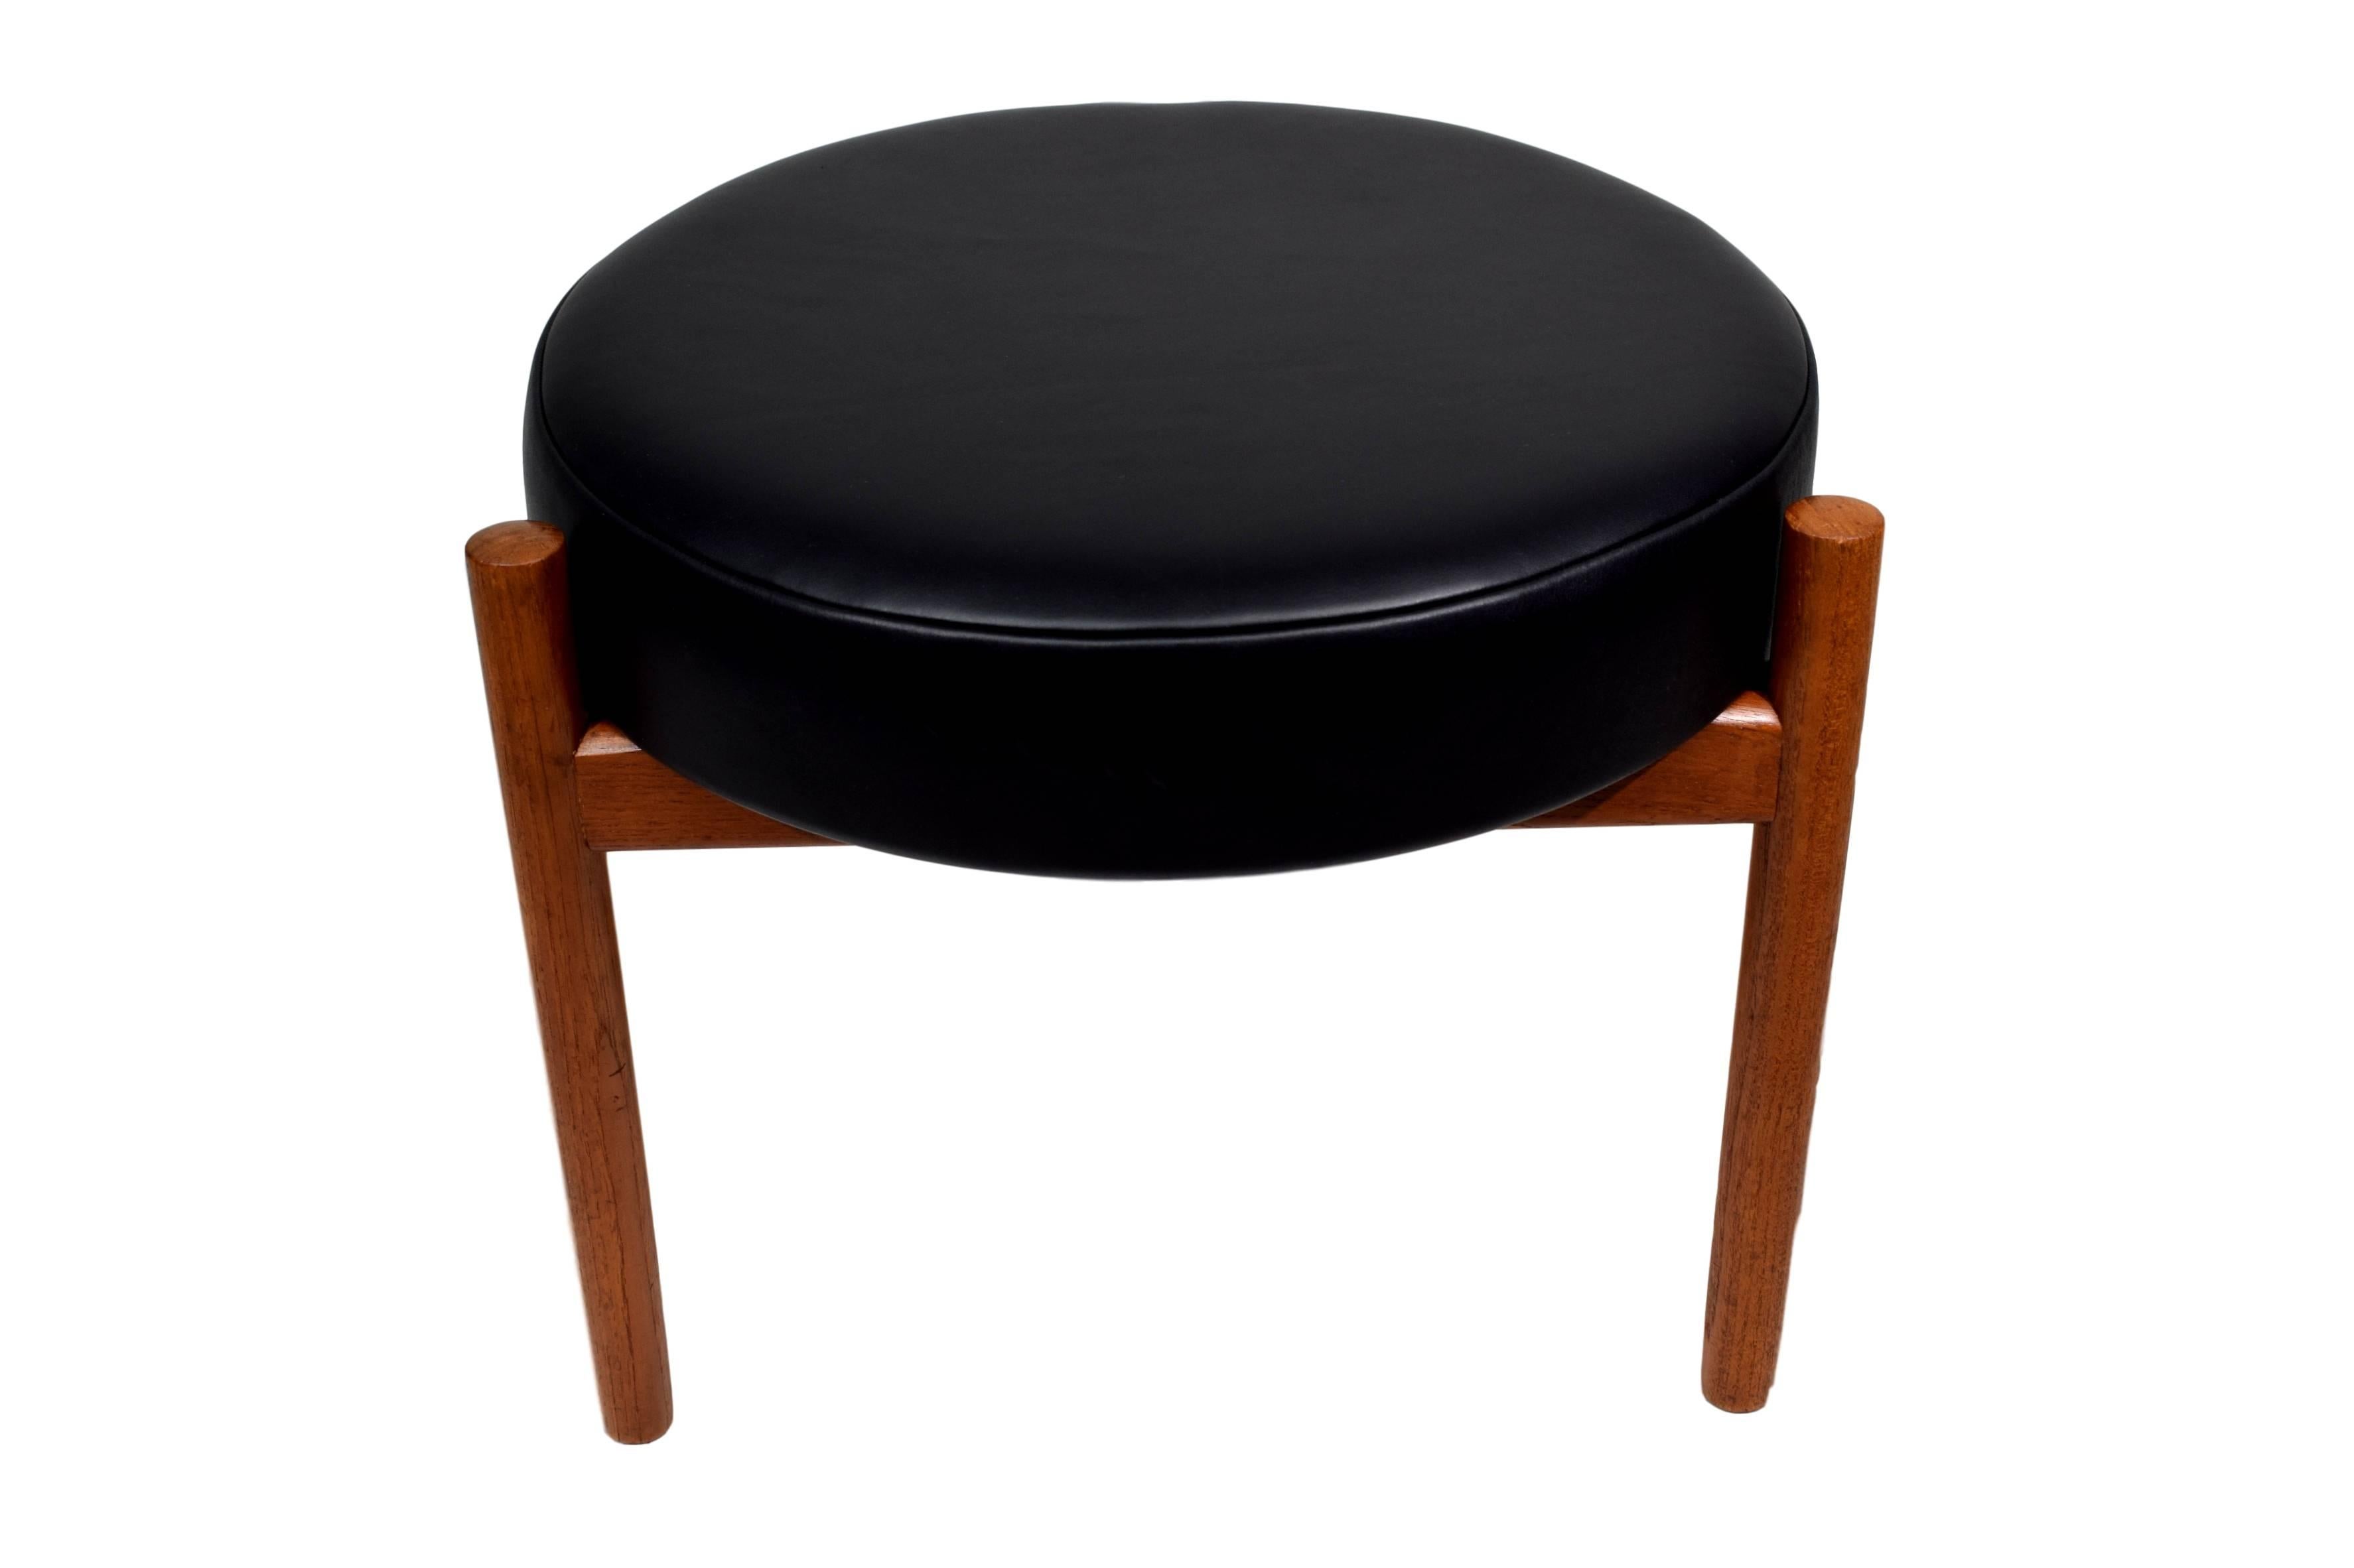 A Danish midcentury teak ottoman by Hugo Frandsen. Produced by Spøttrup. The ottoman is newly upholstered with smooth, black, high-end elegance aniline leather with natural markings from Sørensen leather.



   